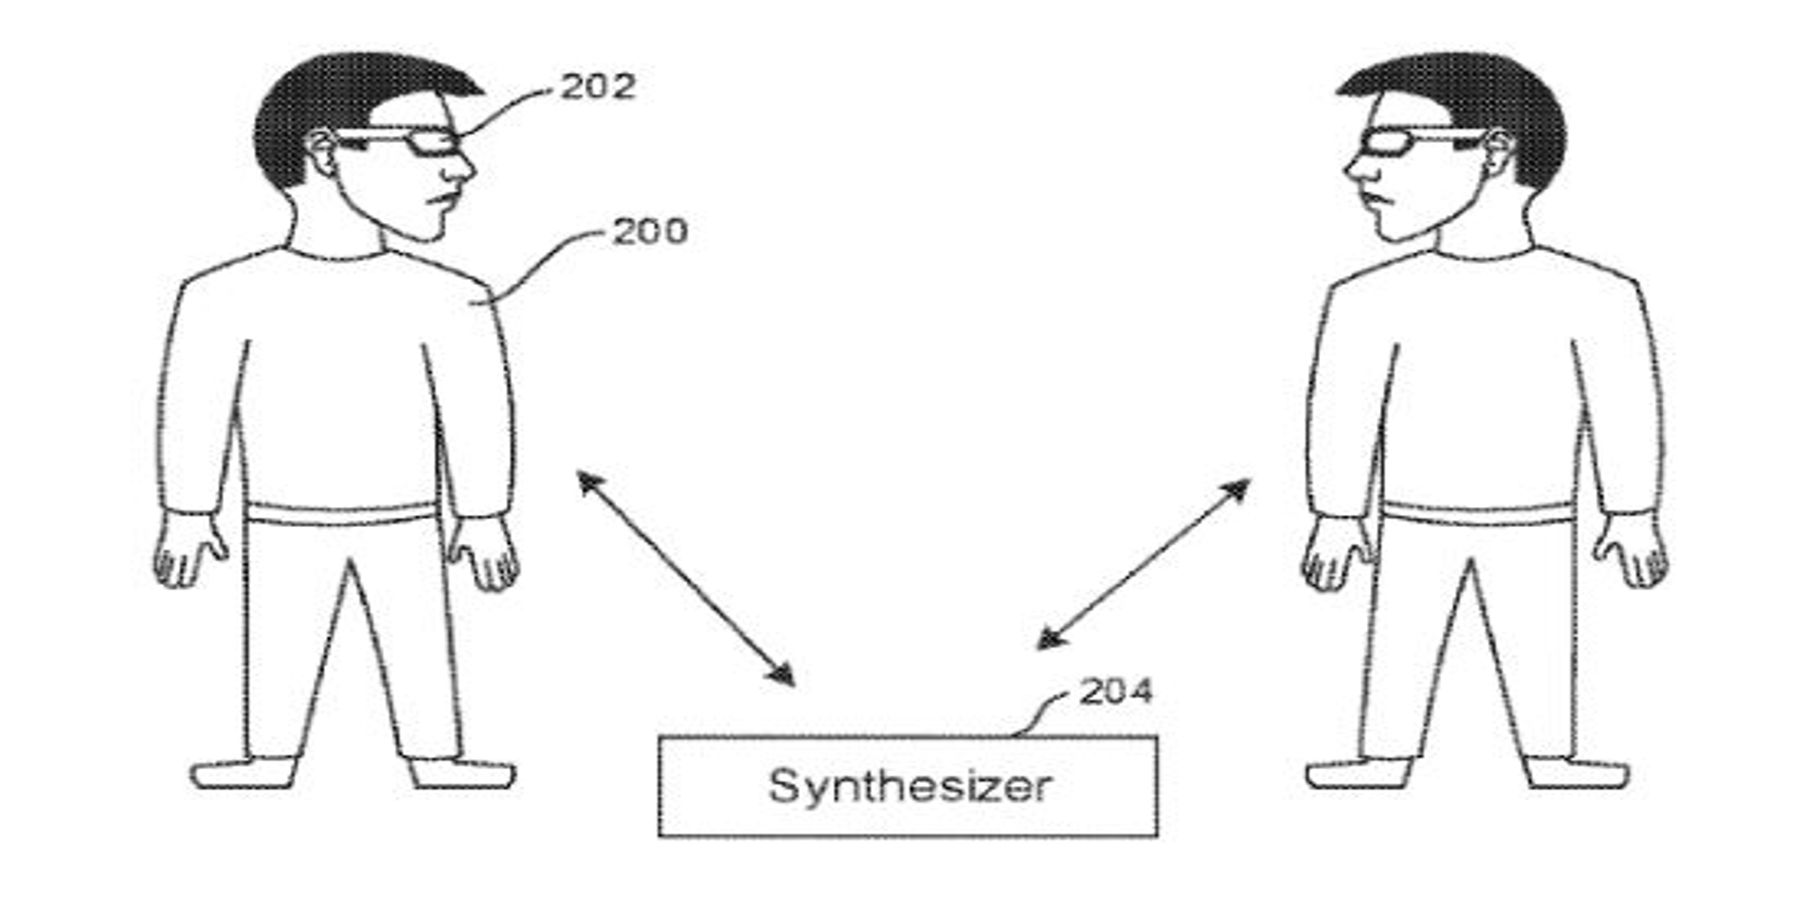 Diagram from an AR gaming patent published by Sony.